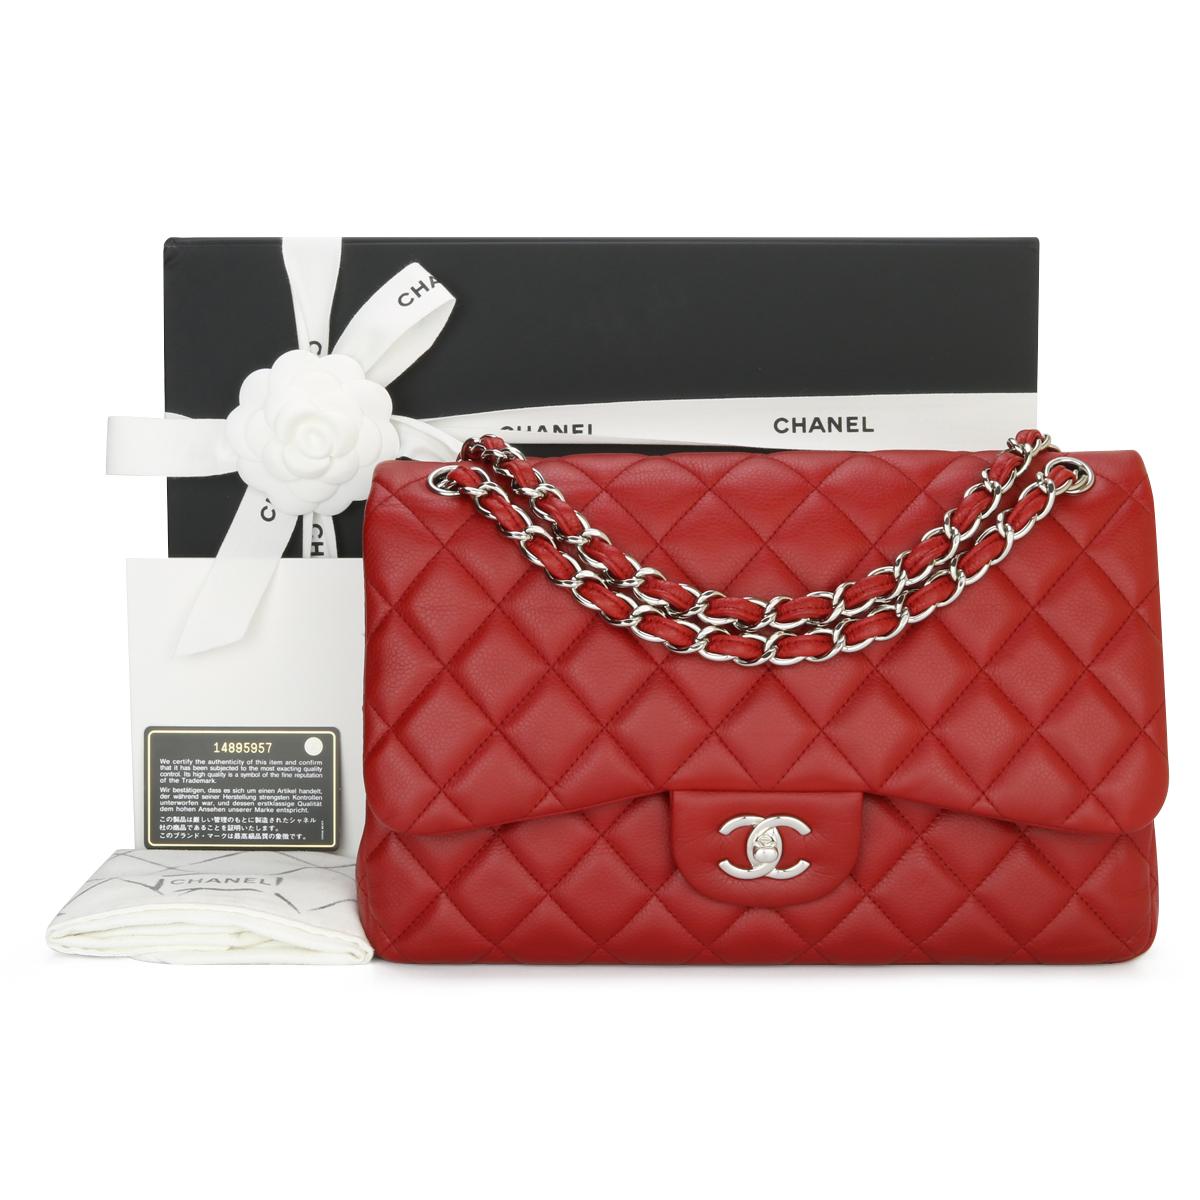 CHANEL Classic Double Flap Jumbo Bag Red in Soft Caviar with Silver Hardware 2011.

This stunning bag is in very good condition, the bag still holds its shape well, and the hardware is still very shiny.

- Exterior Condition: Very good condition,